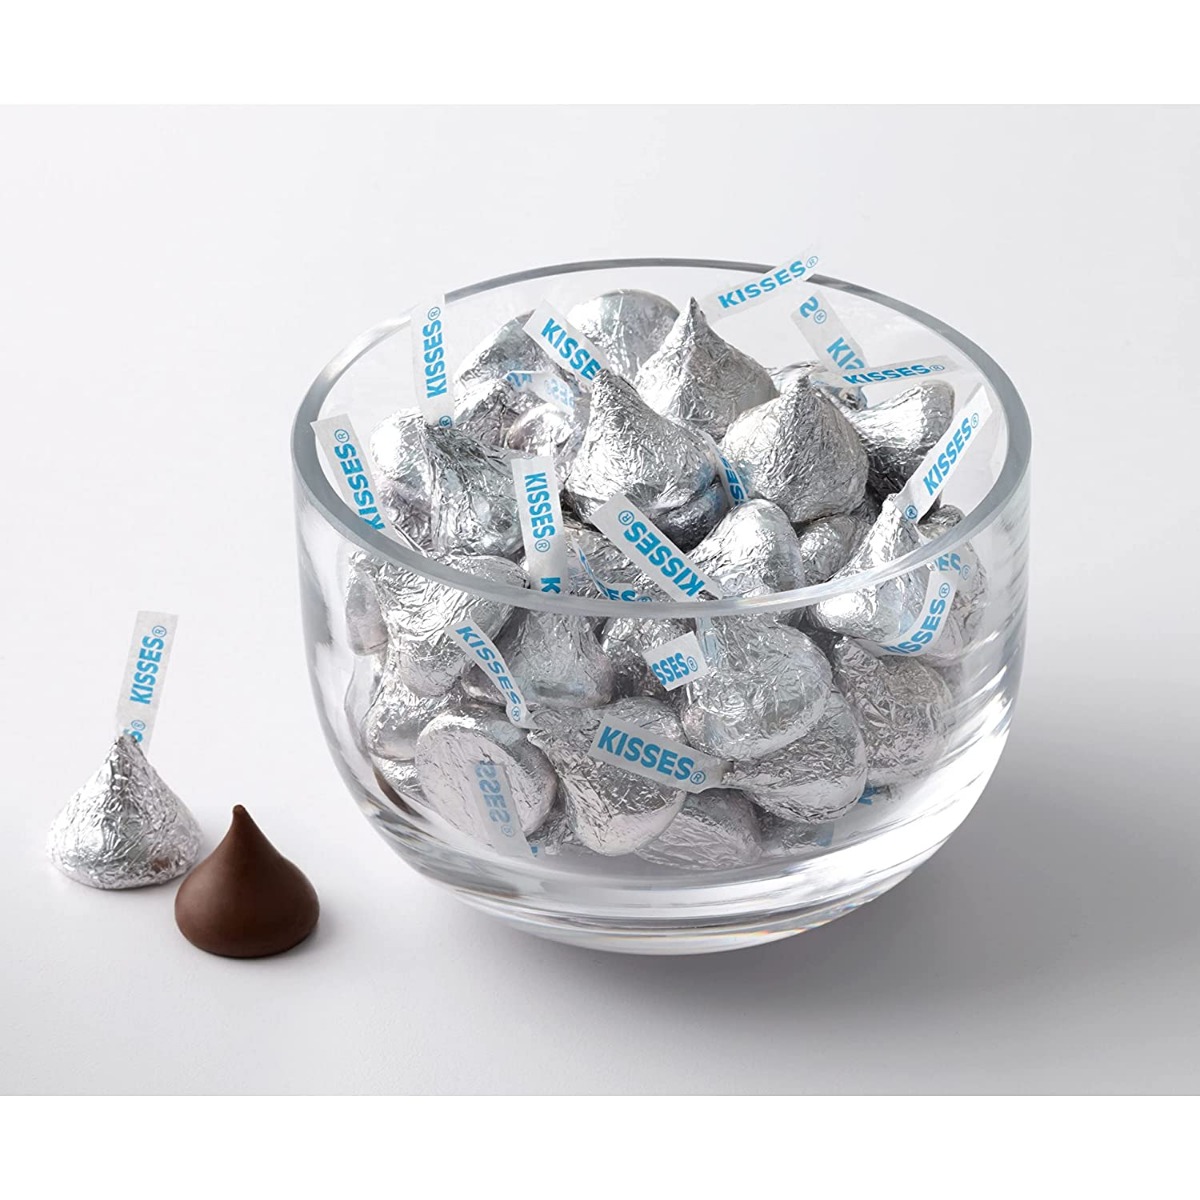 5 Pack – HERSHEY’S KISSES Milk Chocolate Candy, Halloween Candy, 306g Share Bag-11267